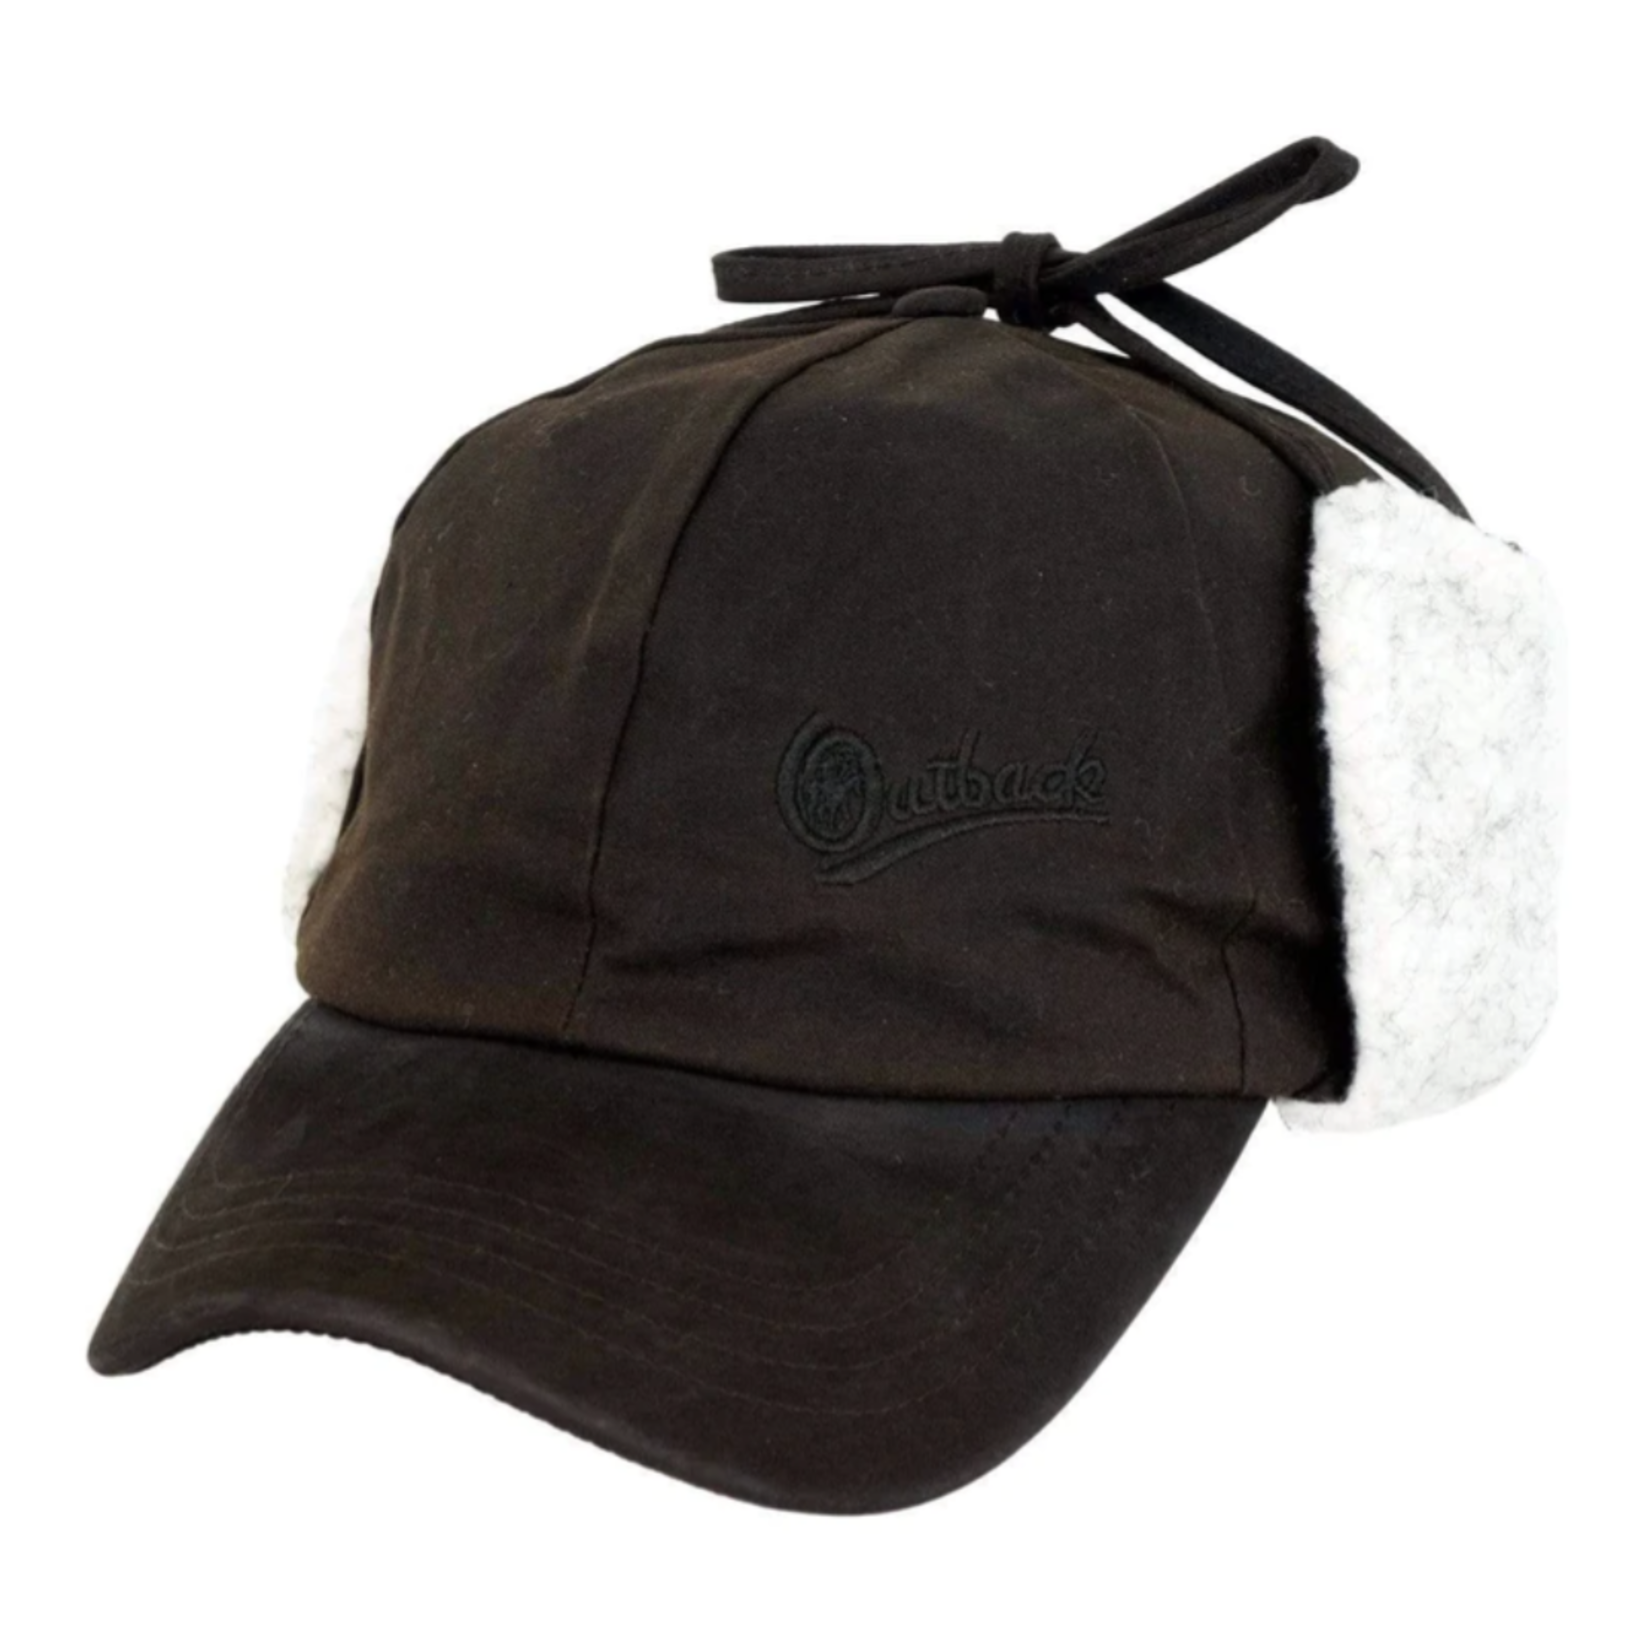 Outback Trading Company McKinley Cap